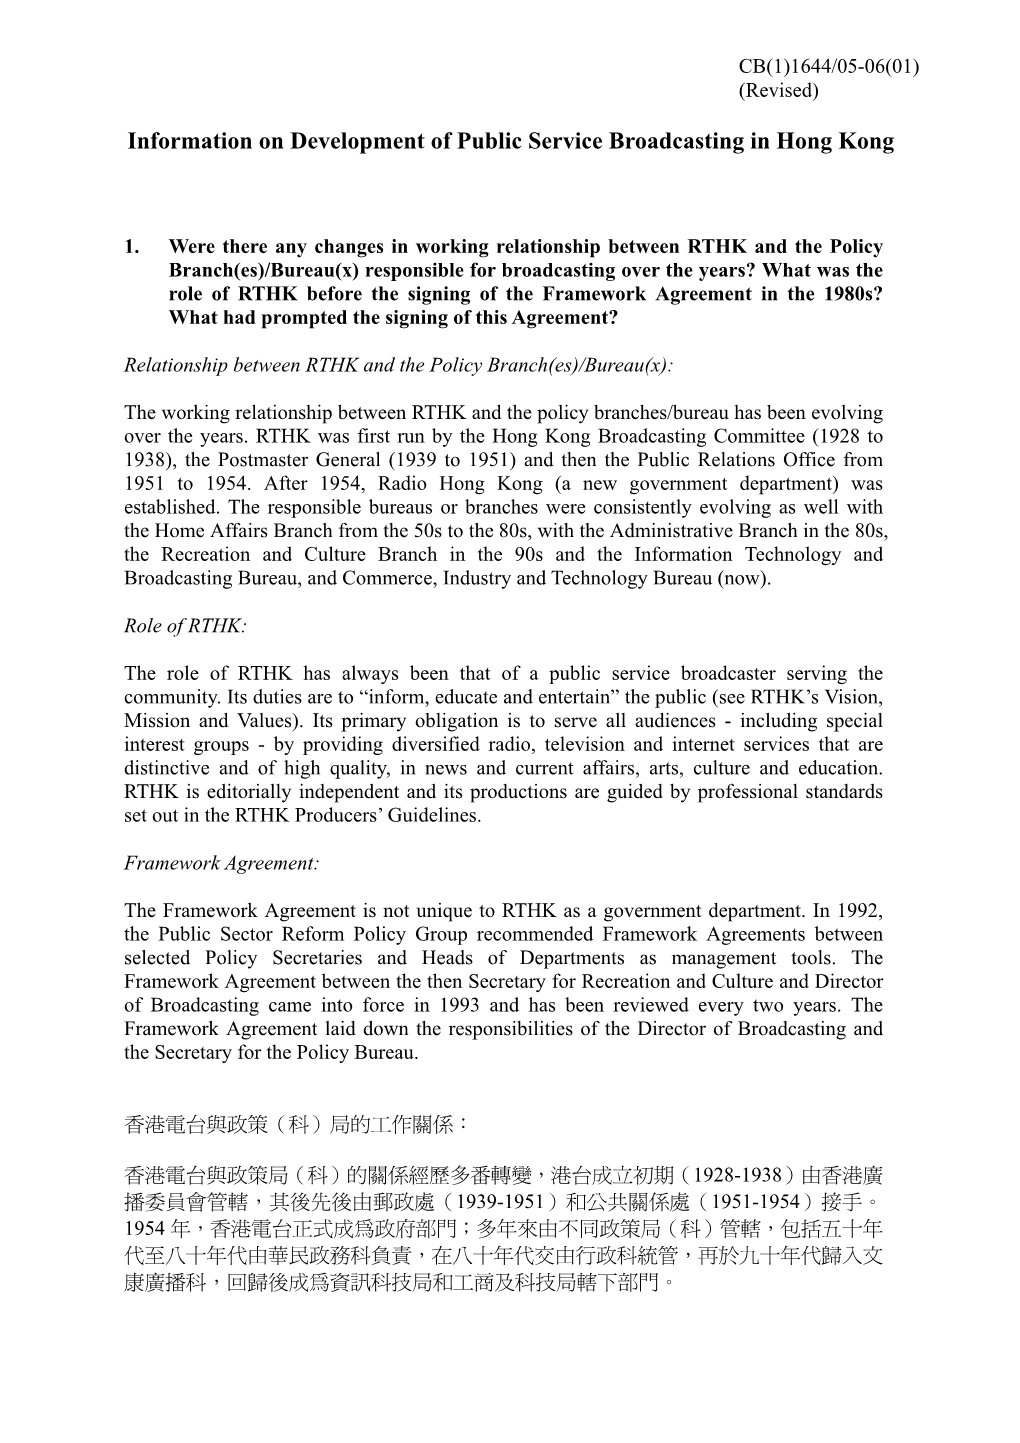 Information on Development of Public Service Broadcasting in Hong Kong